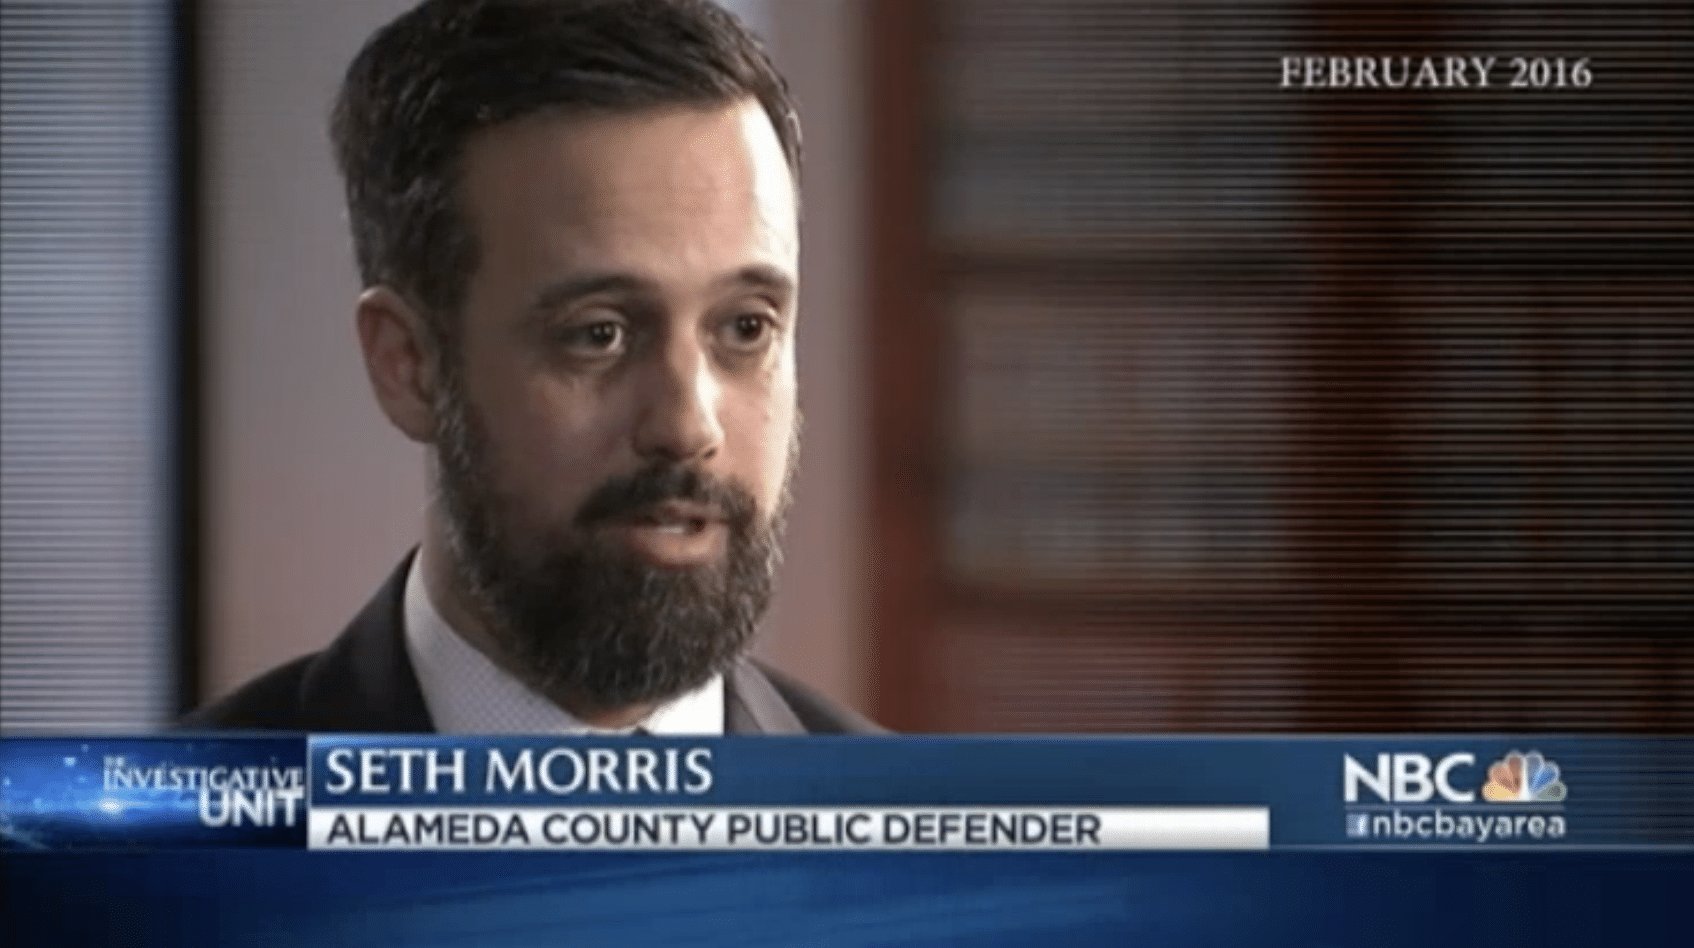 Attorney Seth Morris is interviewed by NBC Bay Area